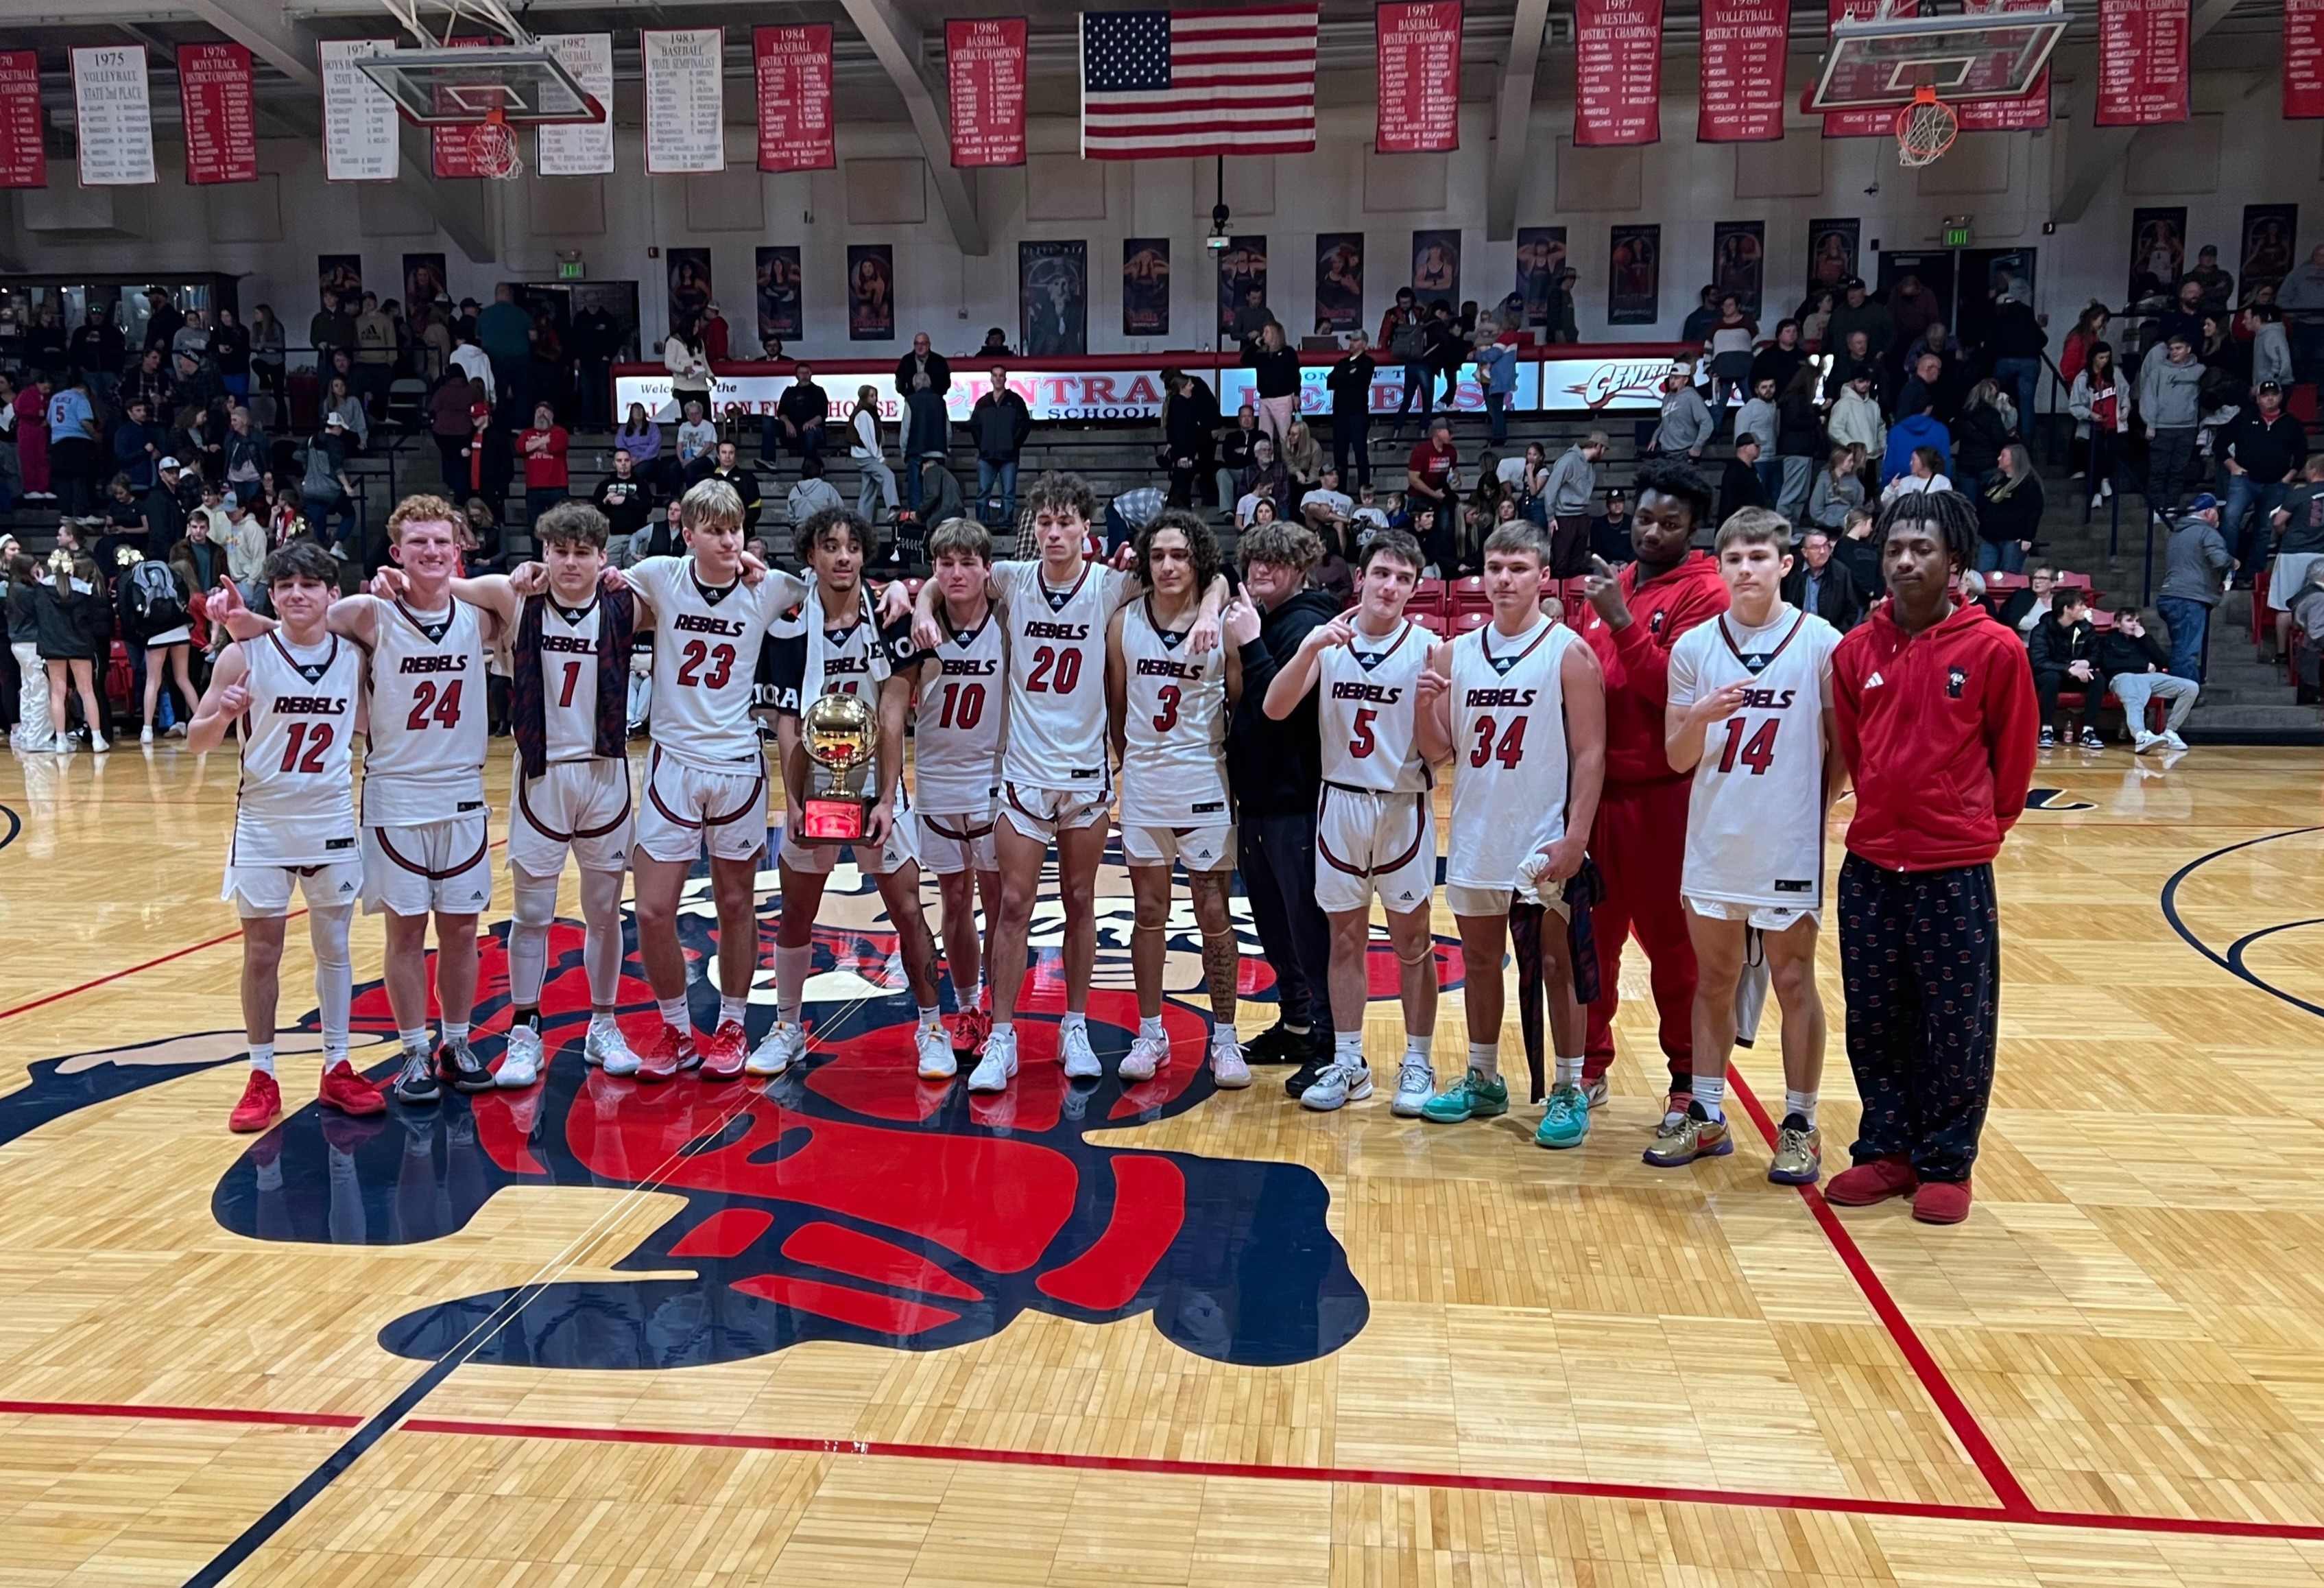 Central Rebels defeat Farmington Knights to win Bob Sechrest Jr. Central Christmas Tournament for second year in a row